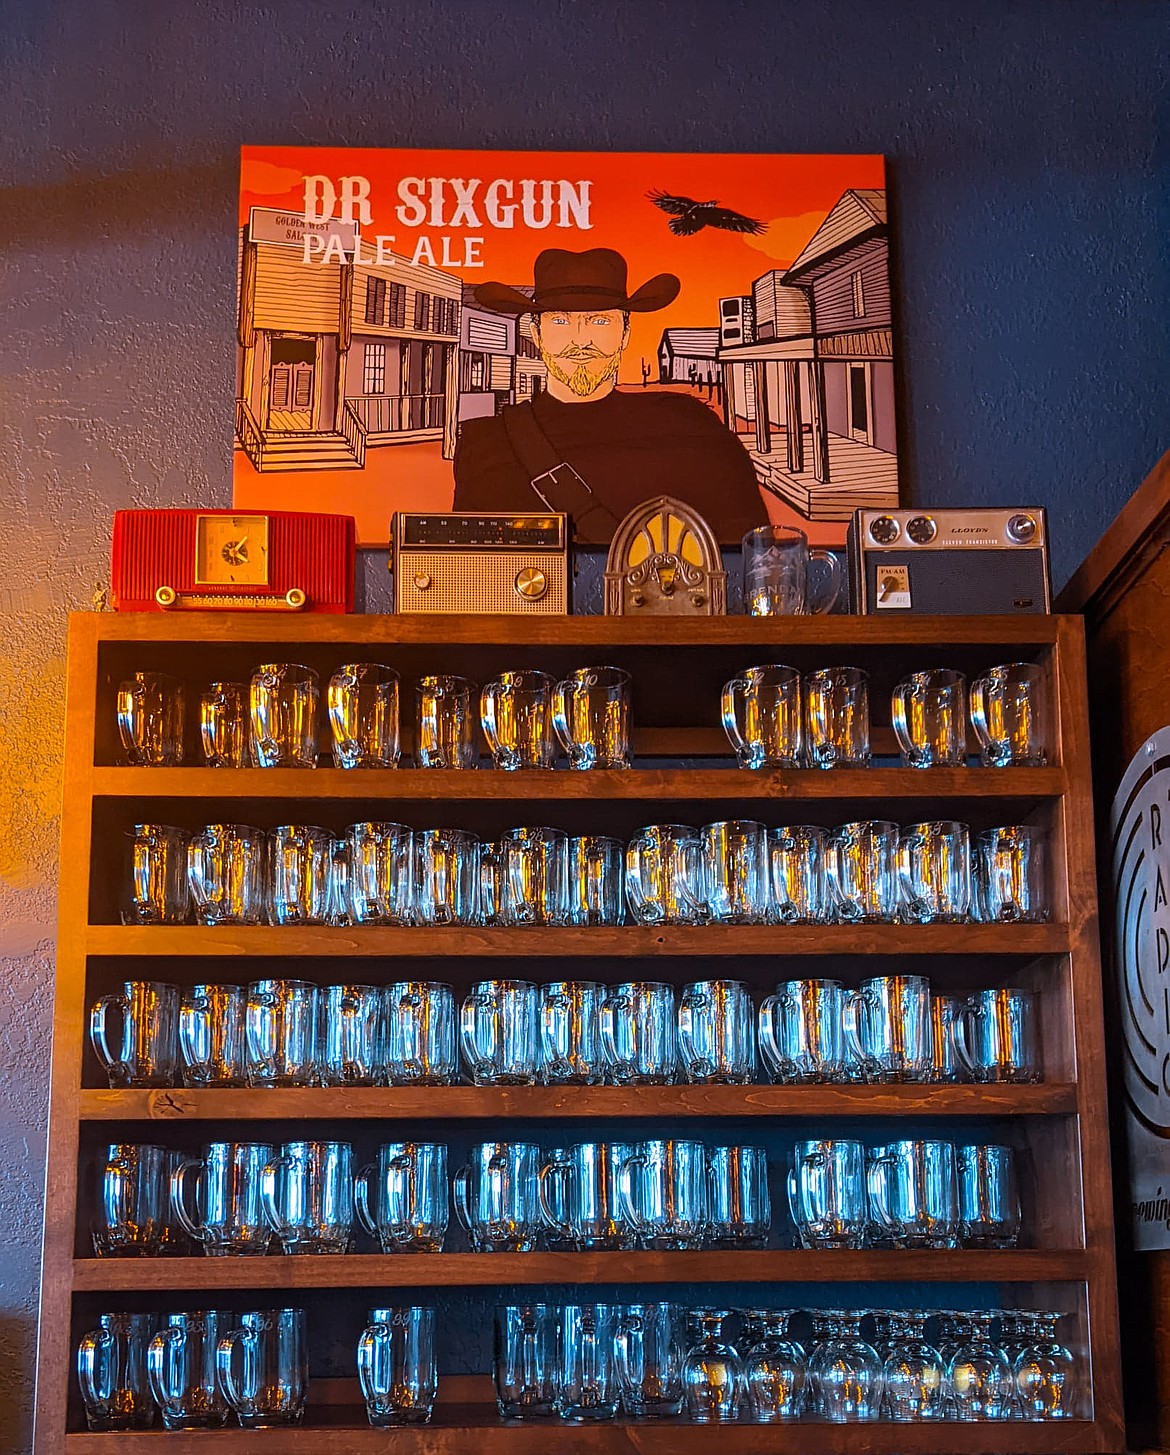 Radio Brewing Company caters to its community by providing a Mug Club for those who love to satiate their thirst with their specialty brewed beer. In the background, the Dr. Sixgun Pale Ale painting was done by the owner, Ashley Mehaffie and was one of the first beers brewed for the company.